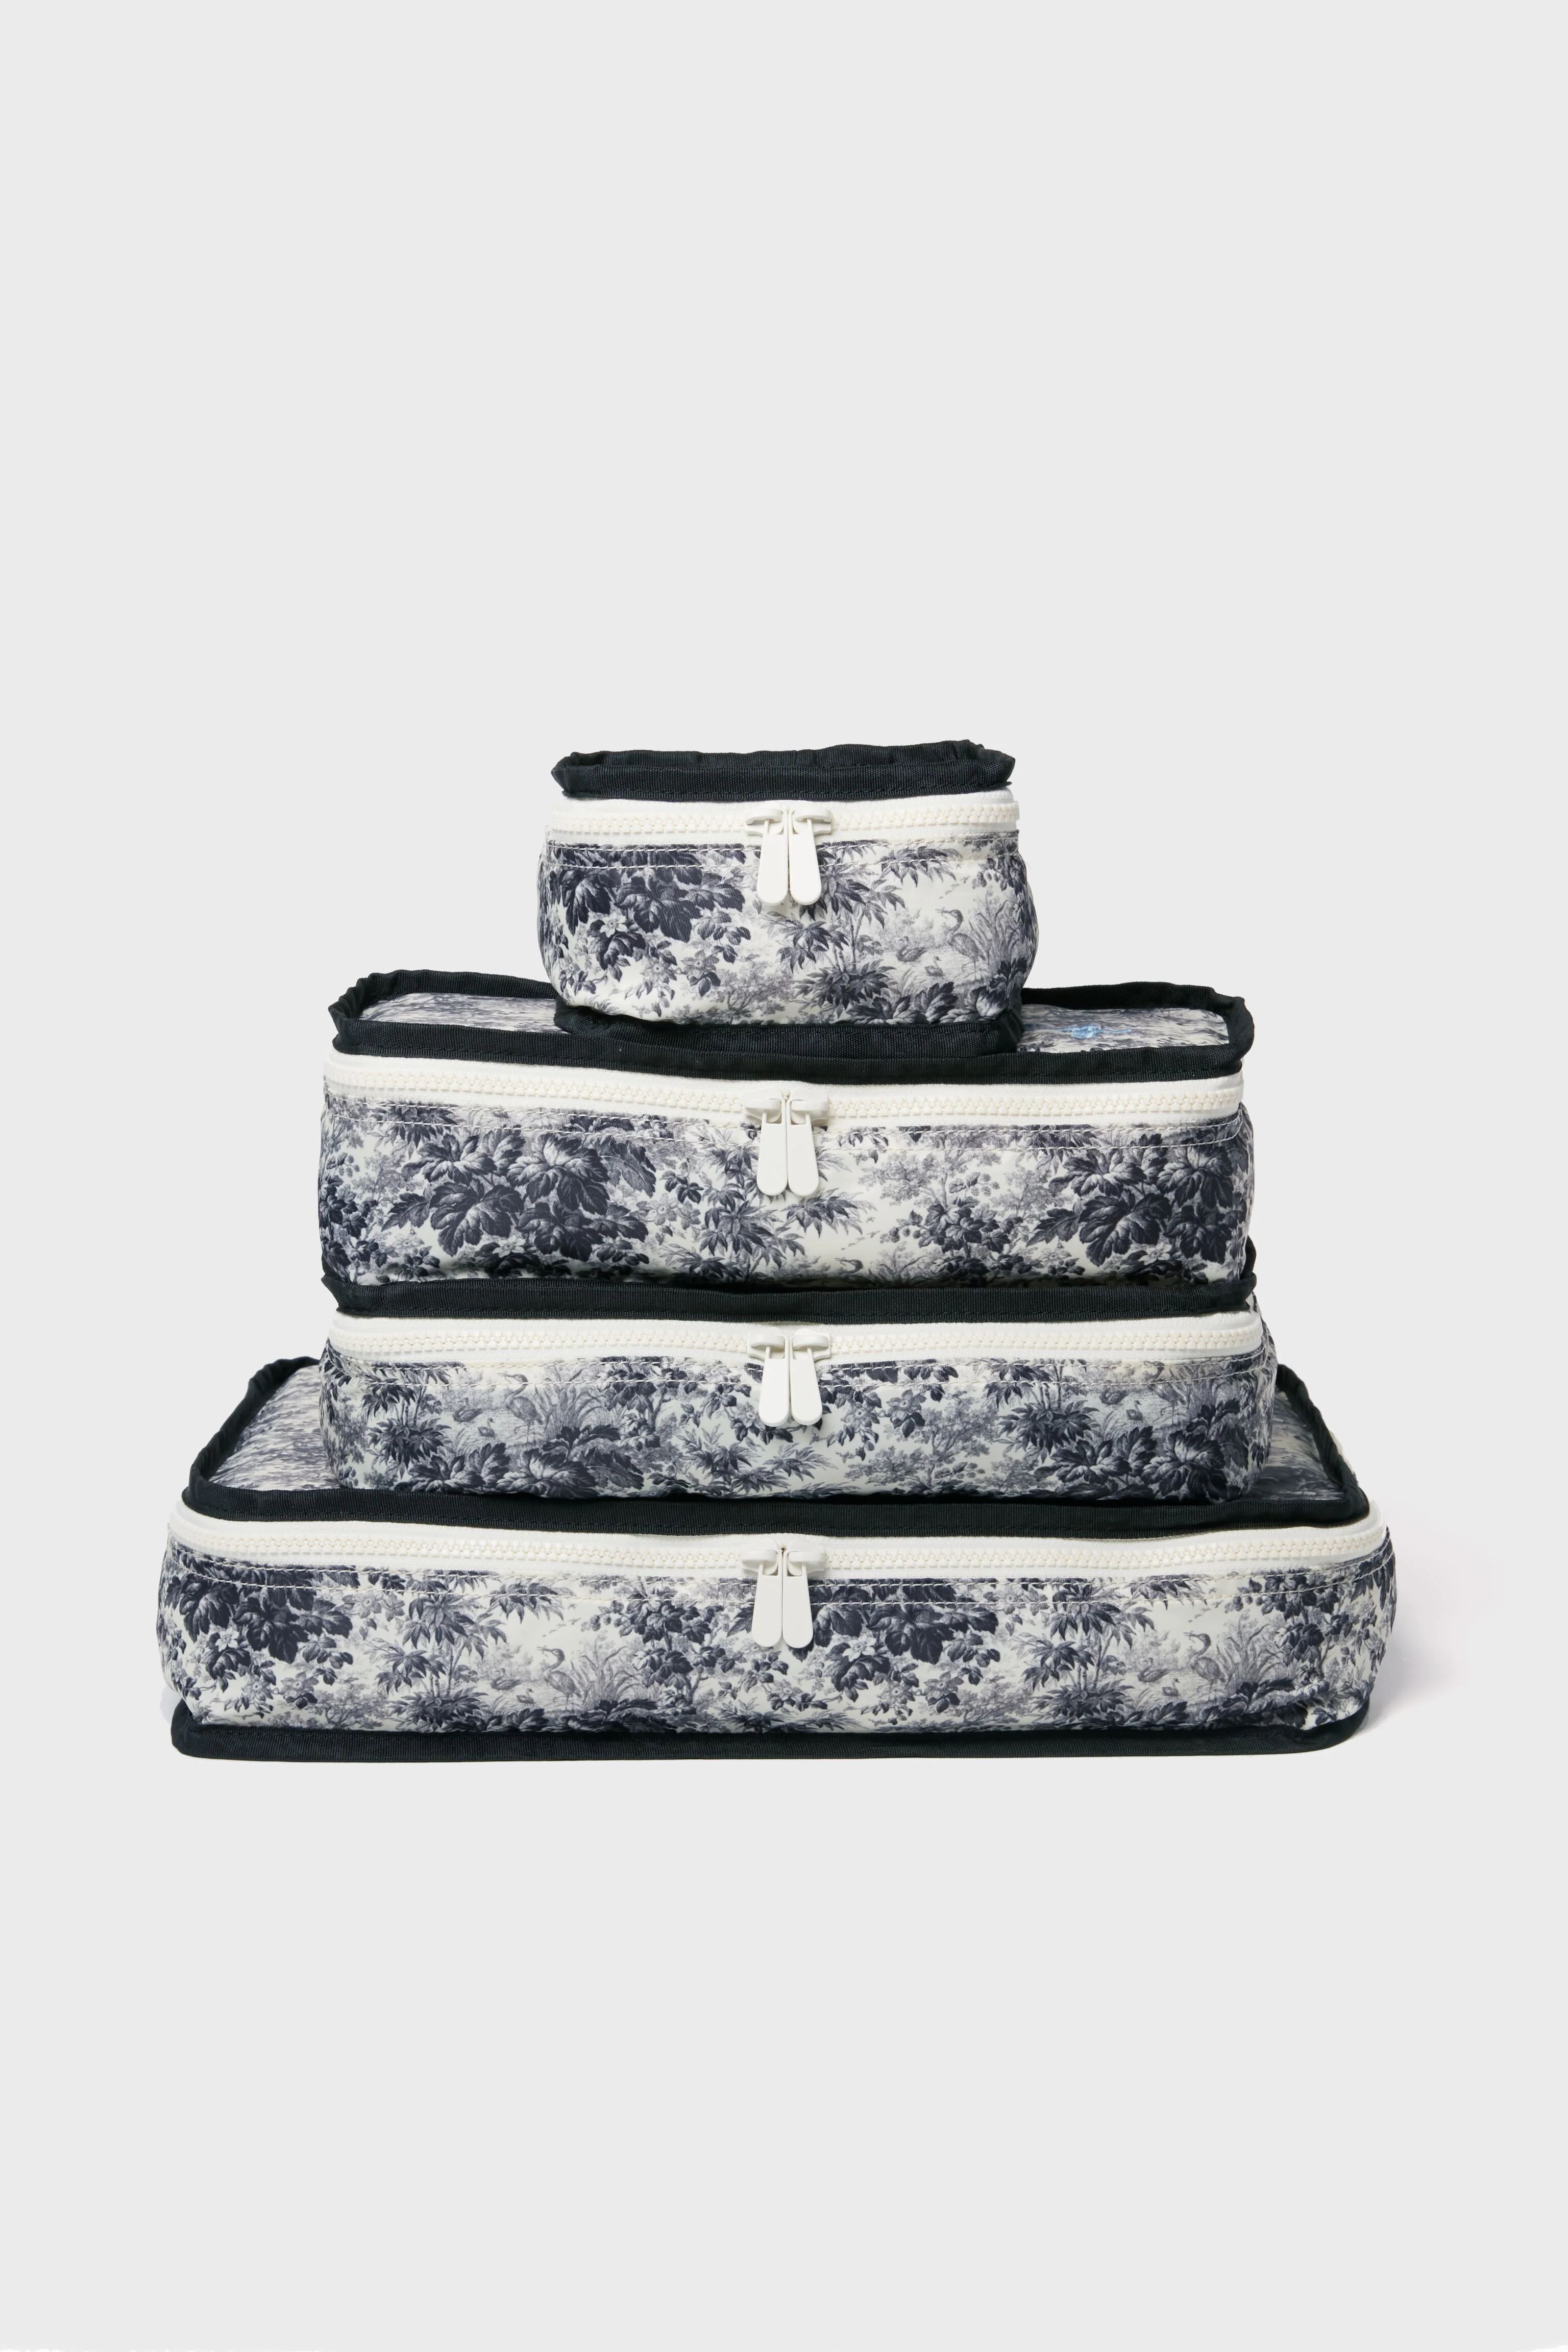 Exclusive Noir Cypress Toile Packing Cubes | Tuckernuck (US)